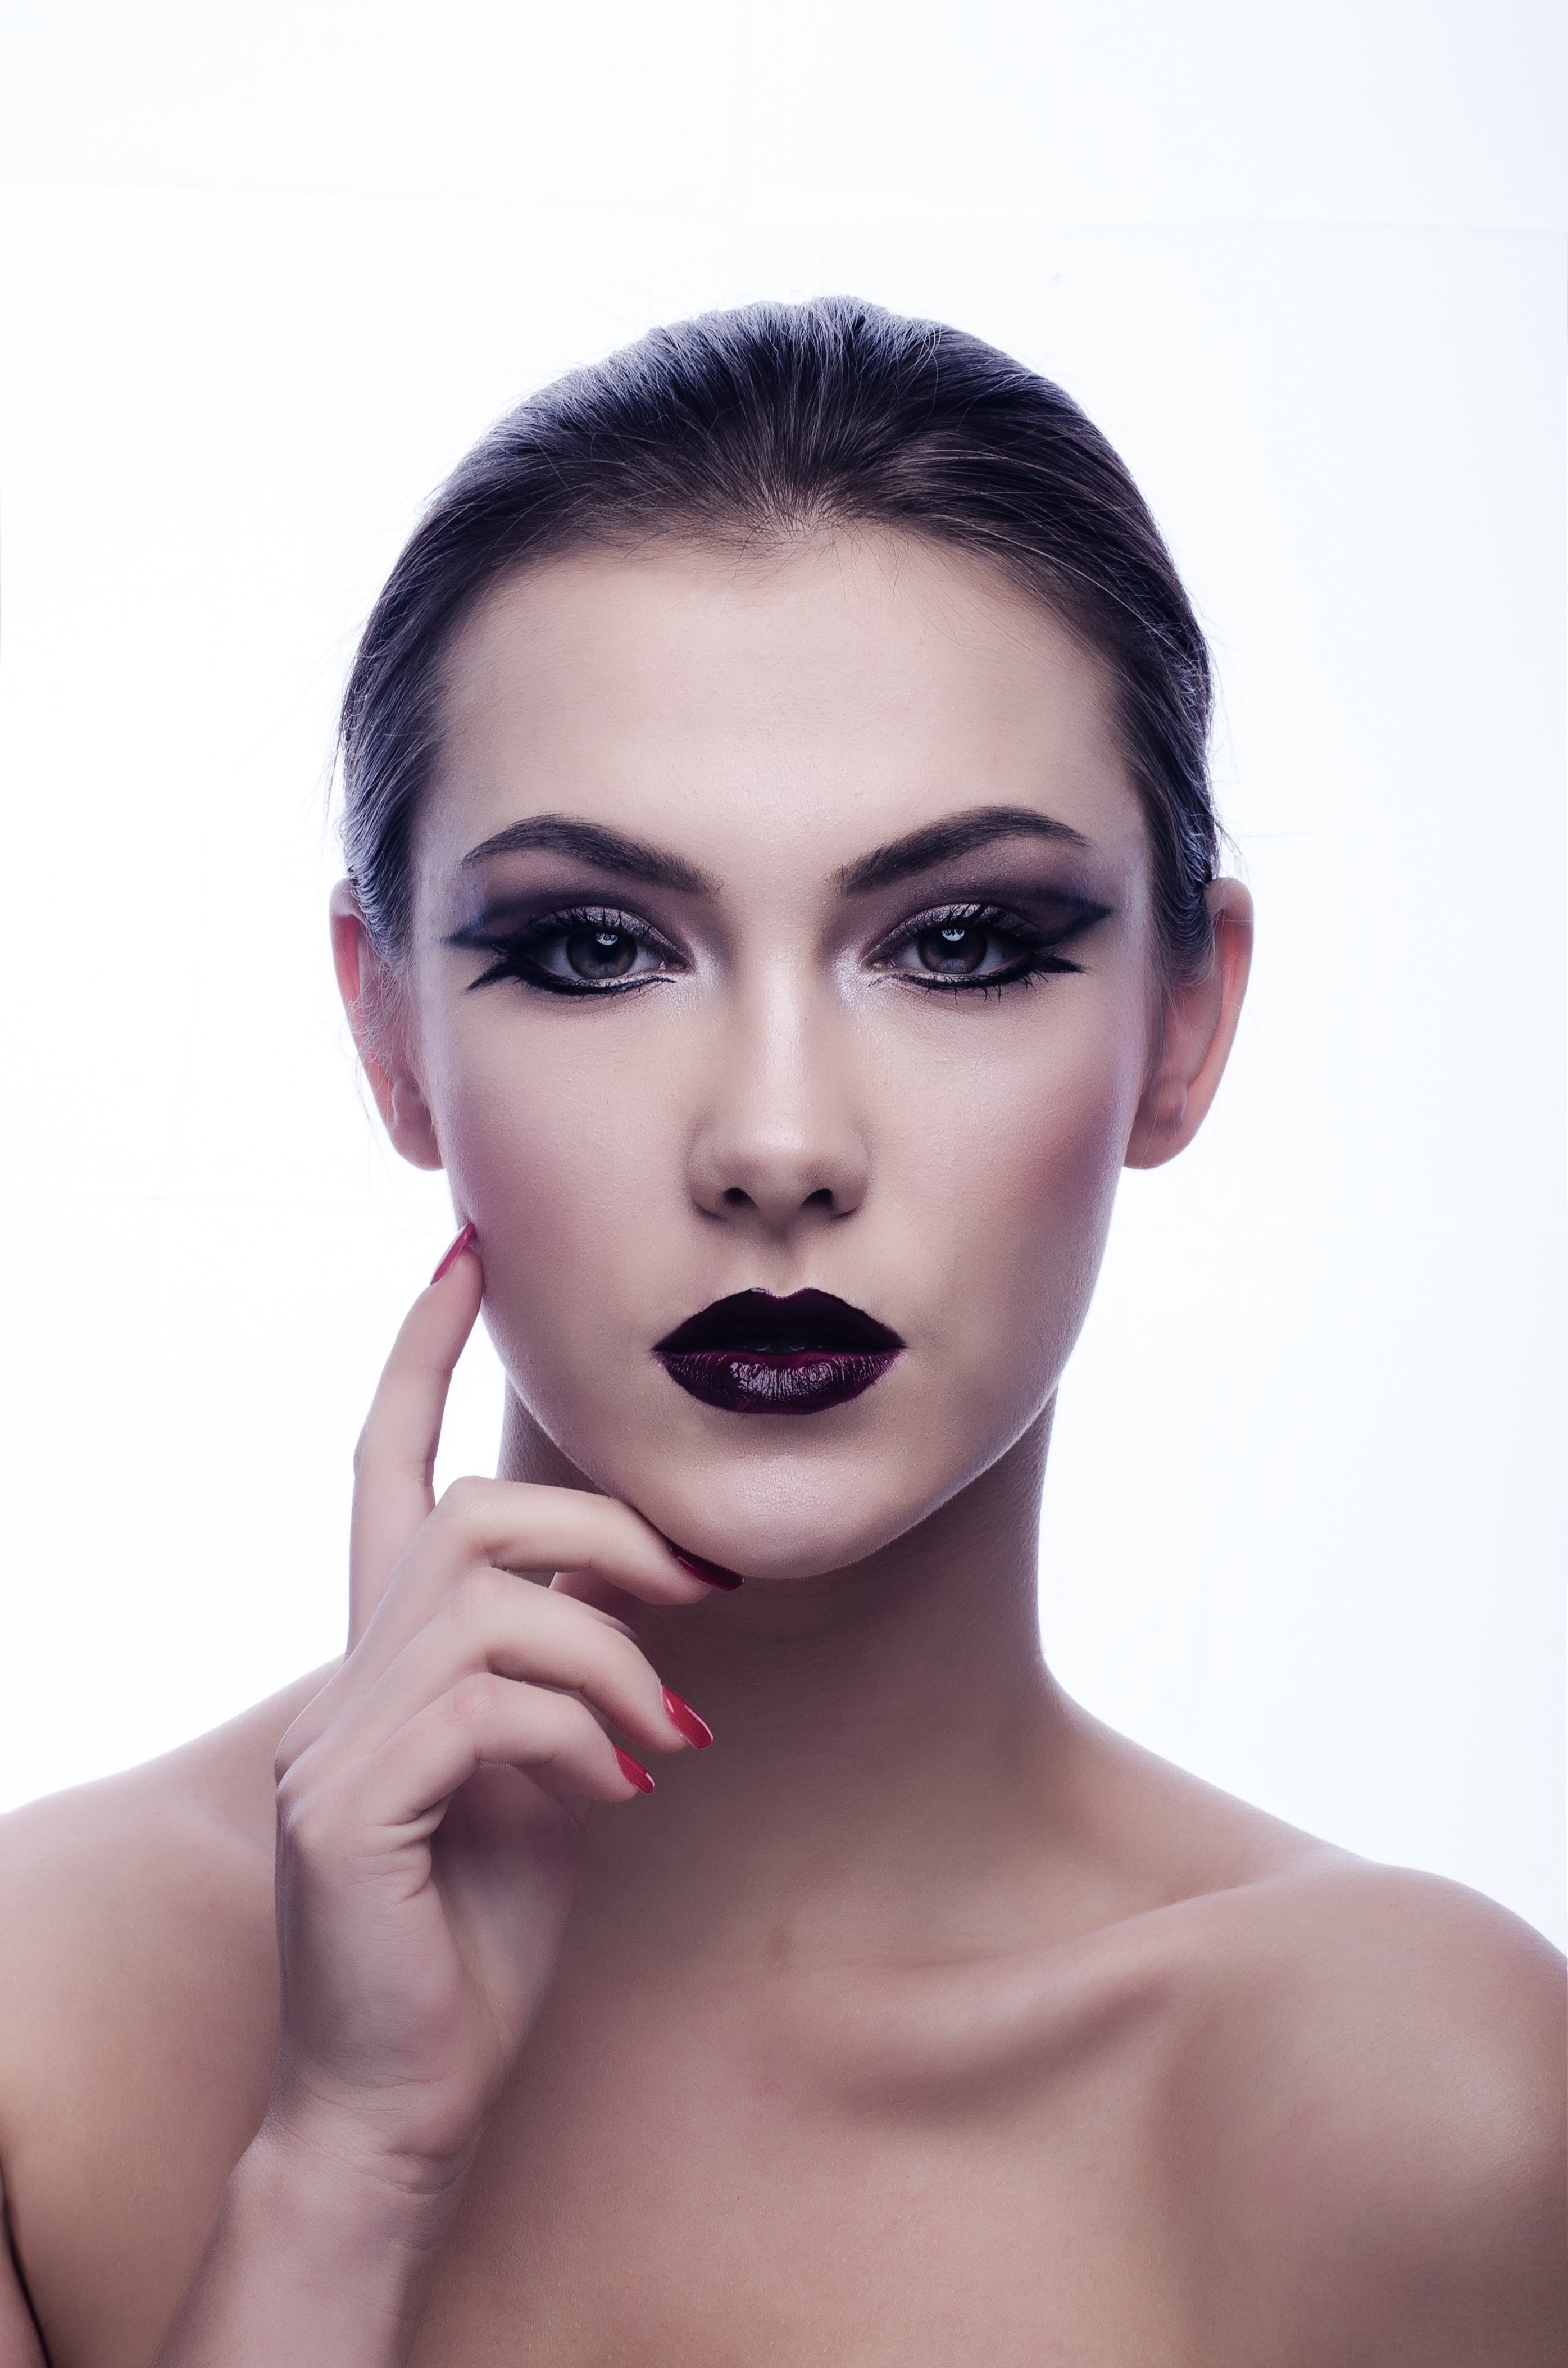 Naked Woman in Black Eyeliner and Maroon Lips · Free